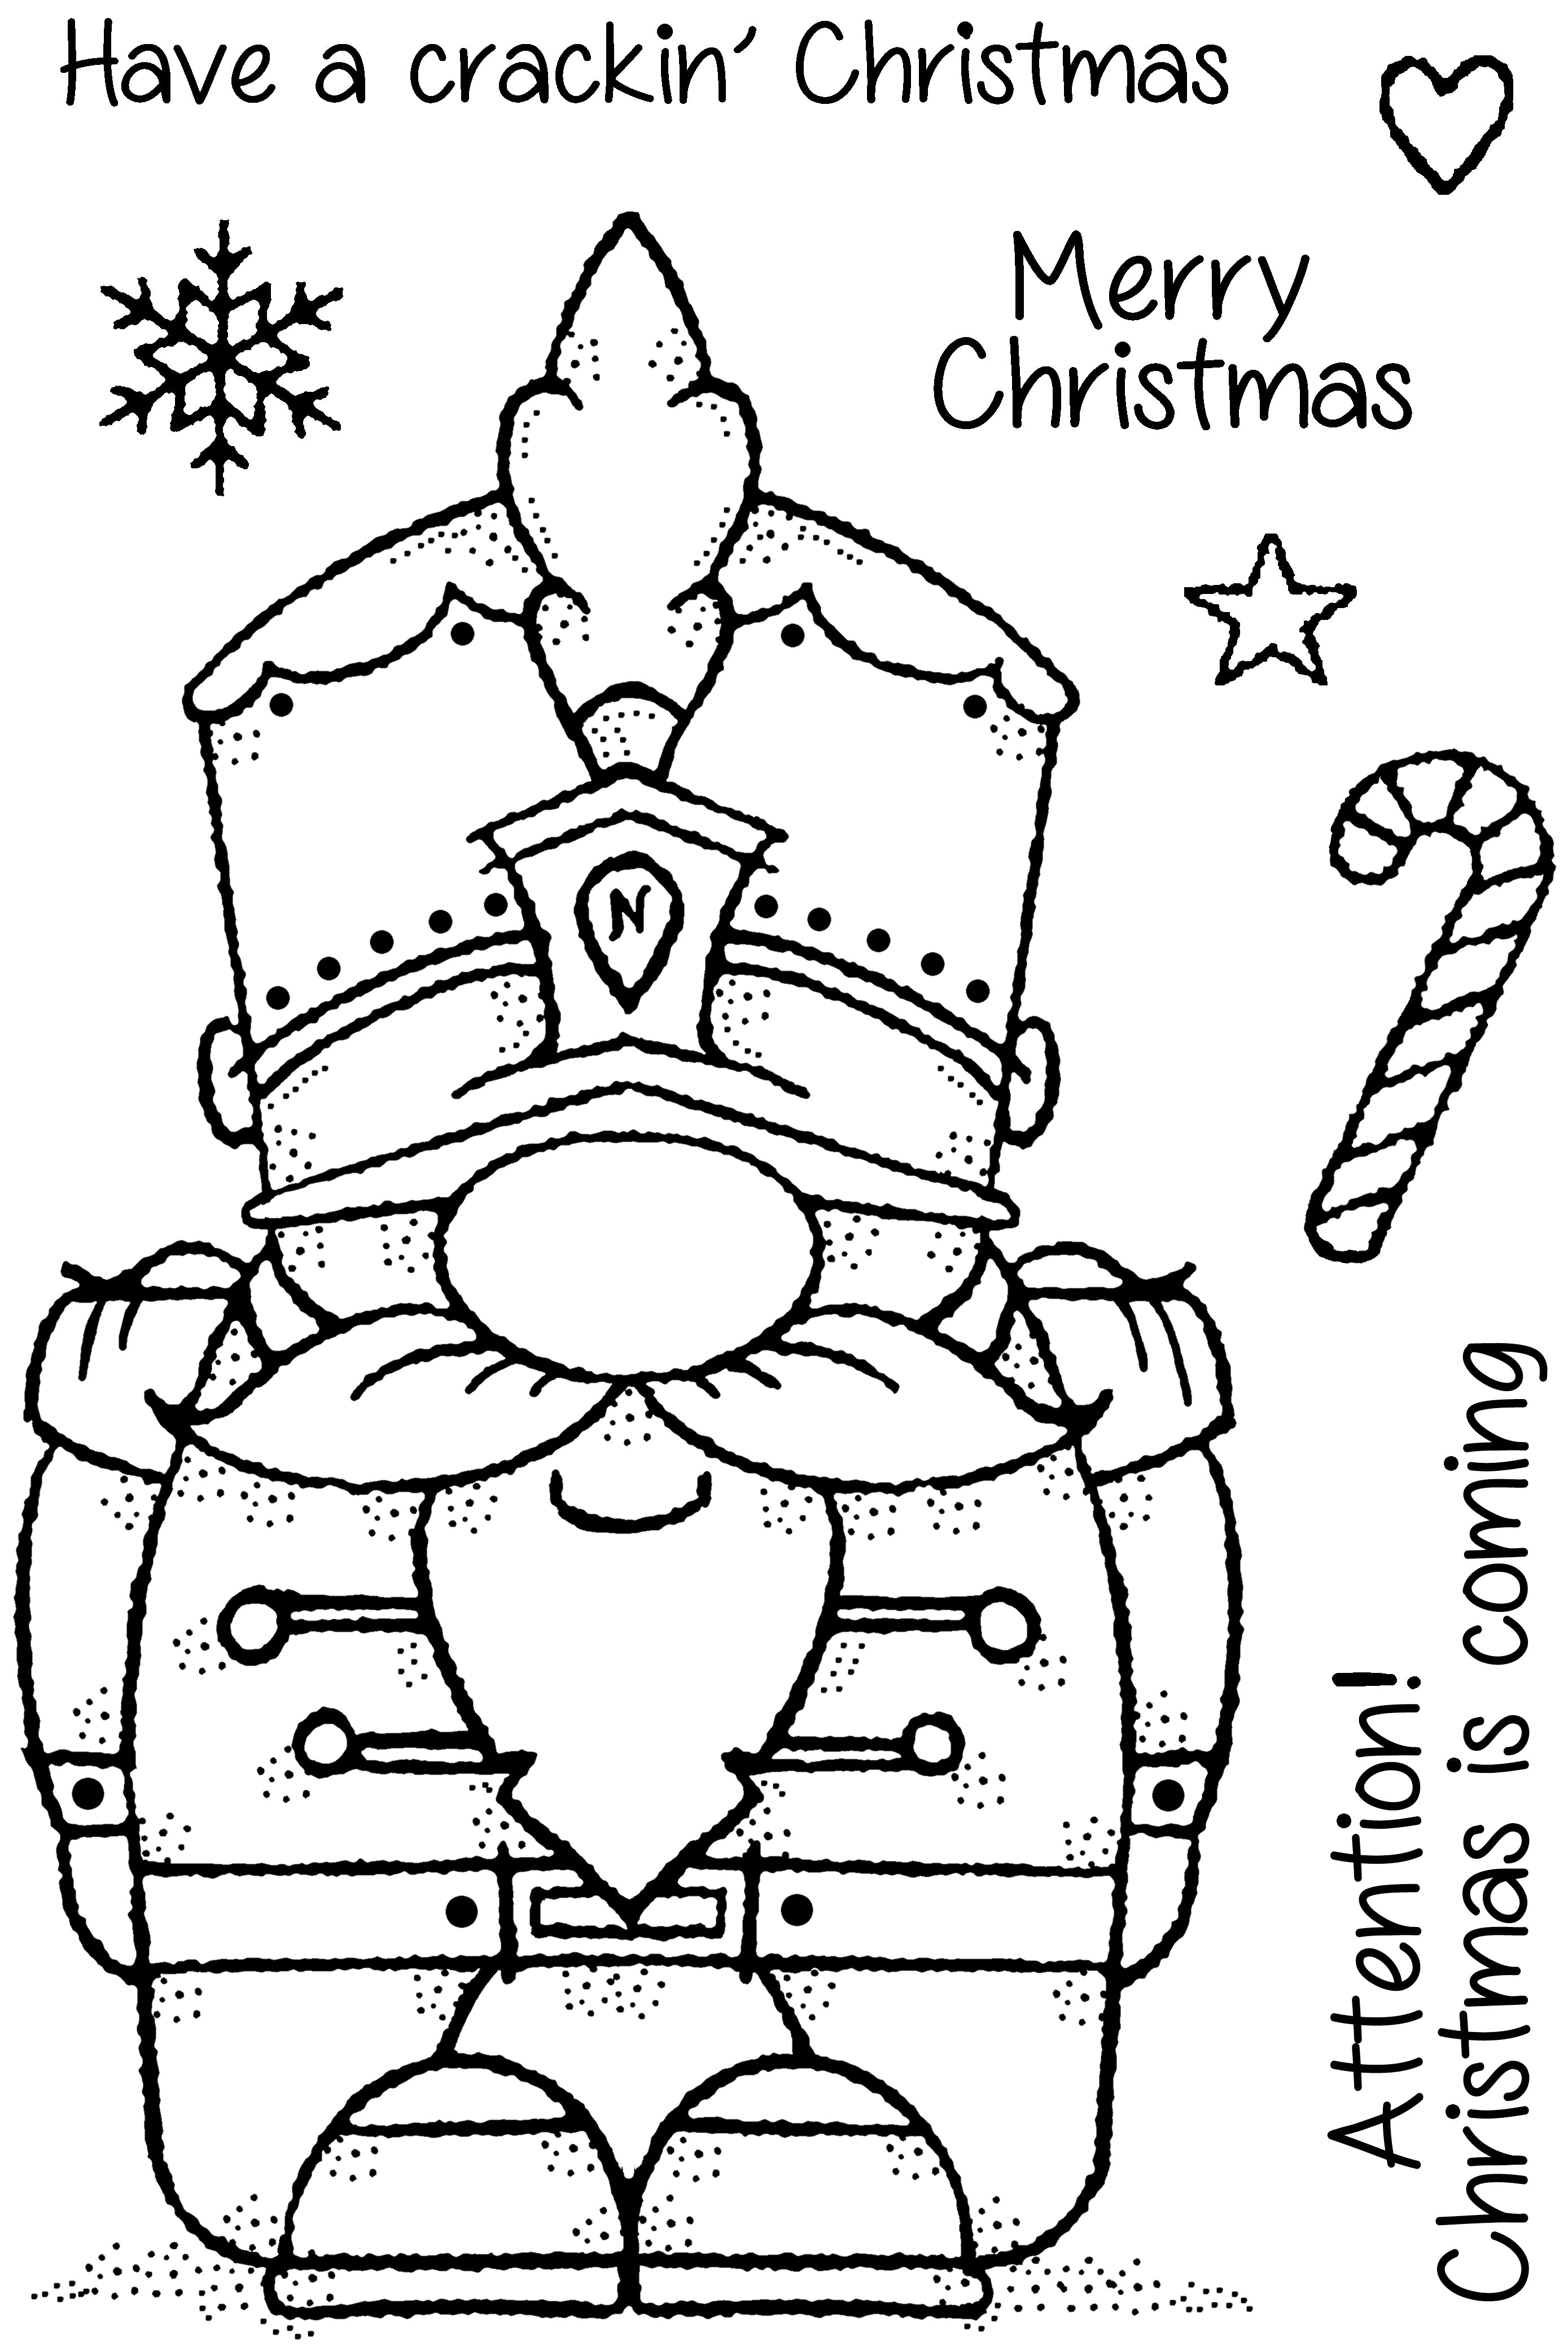 Woodware Clear Singles Nutcracker Gnome 4 in x 6 in Stamp Set